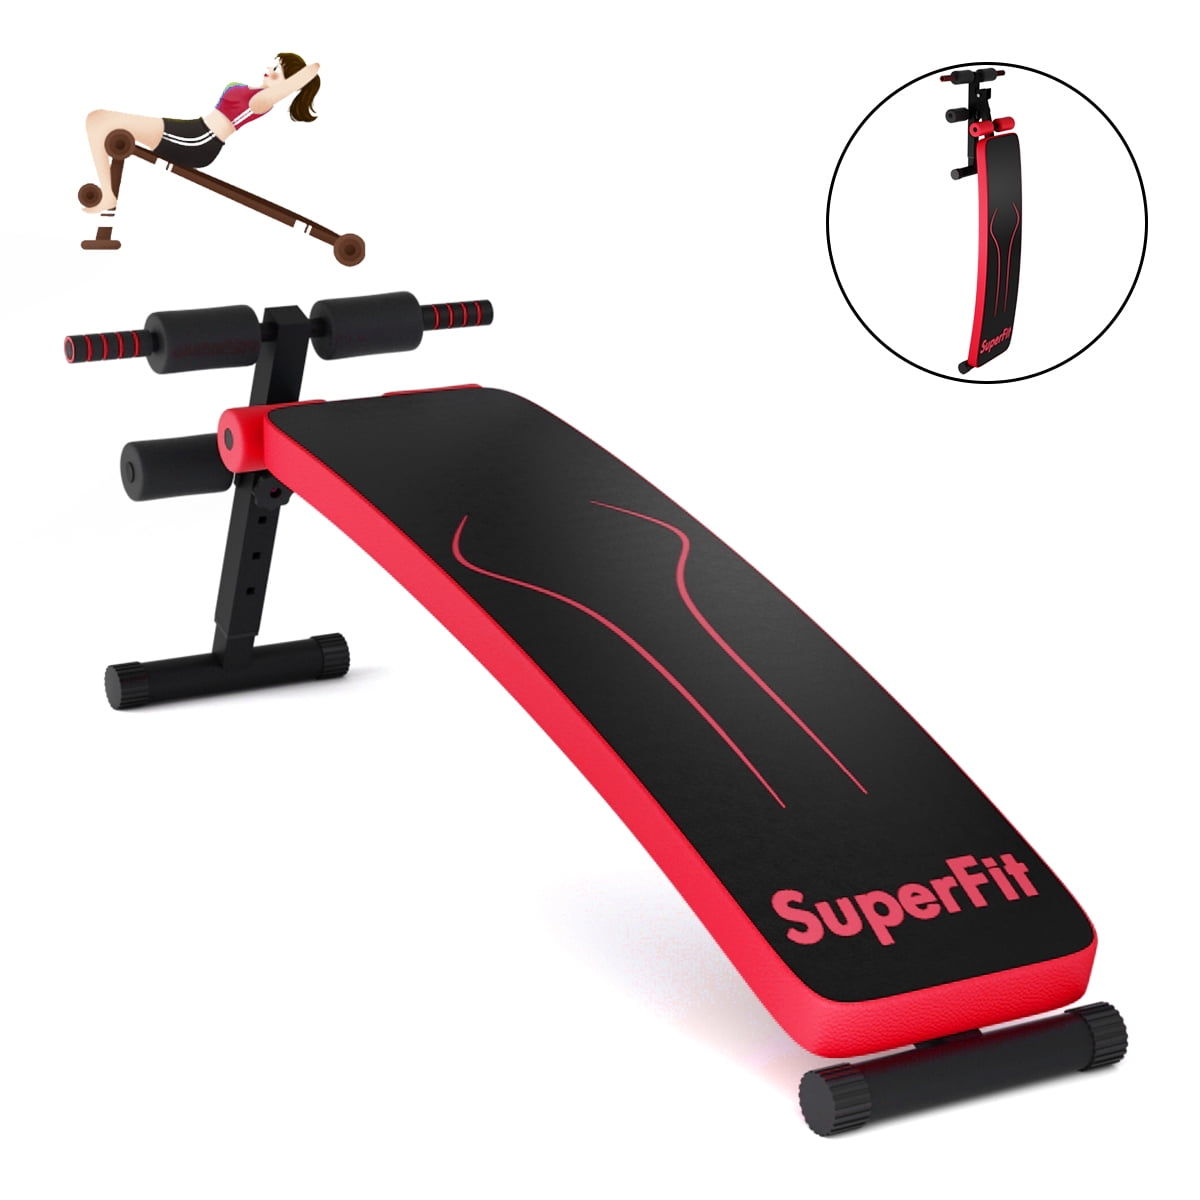 Gym and Office DORTALA Adjustable Weight Bench Sit Up Bench for Home Folding Strength Training Bench Foldable Utility Weight Bench for Full Body Workout 